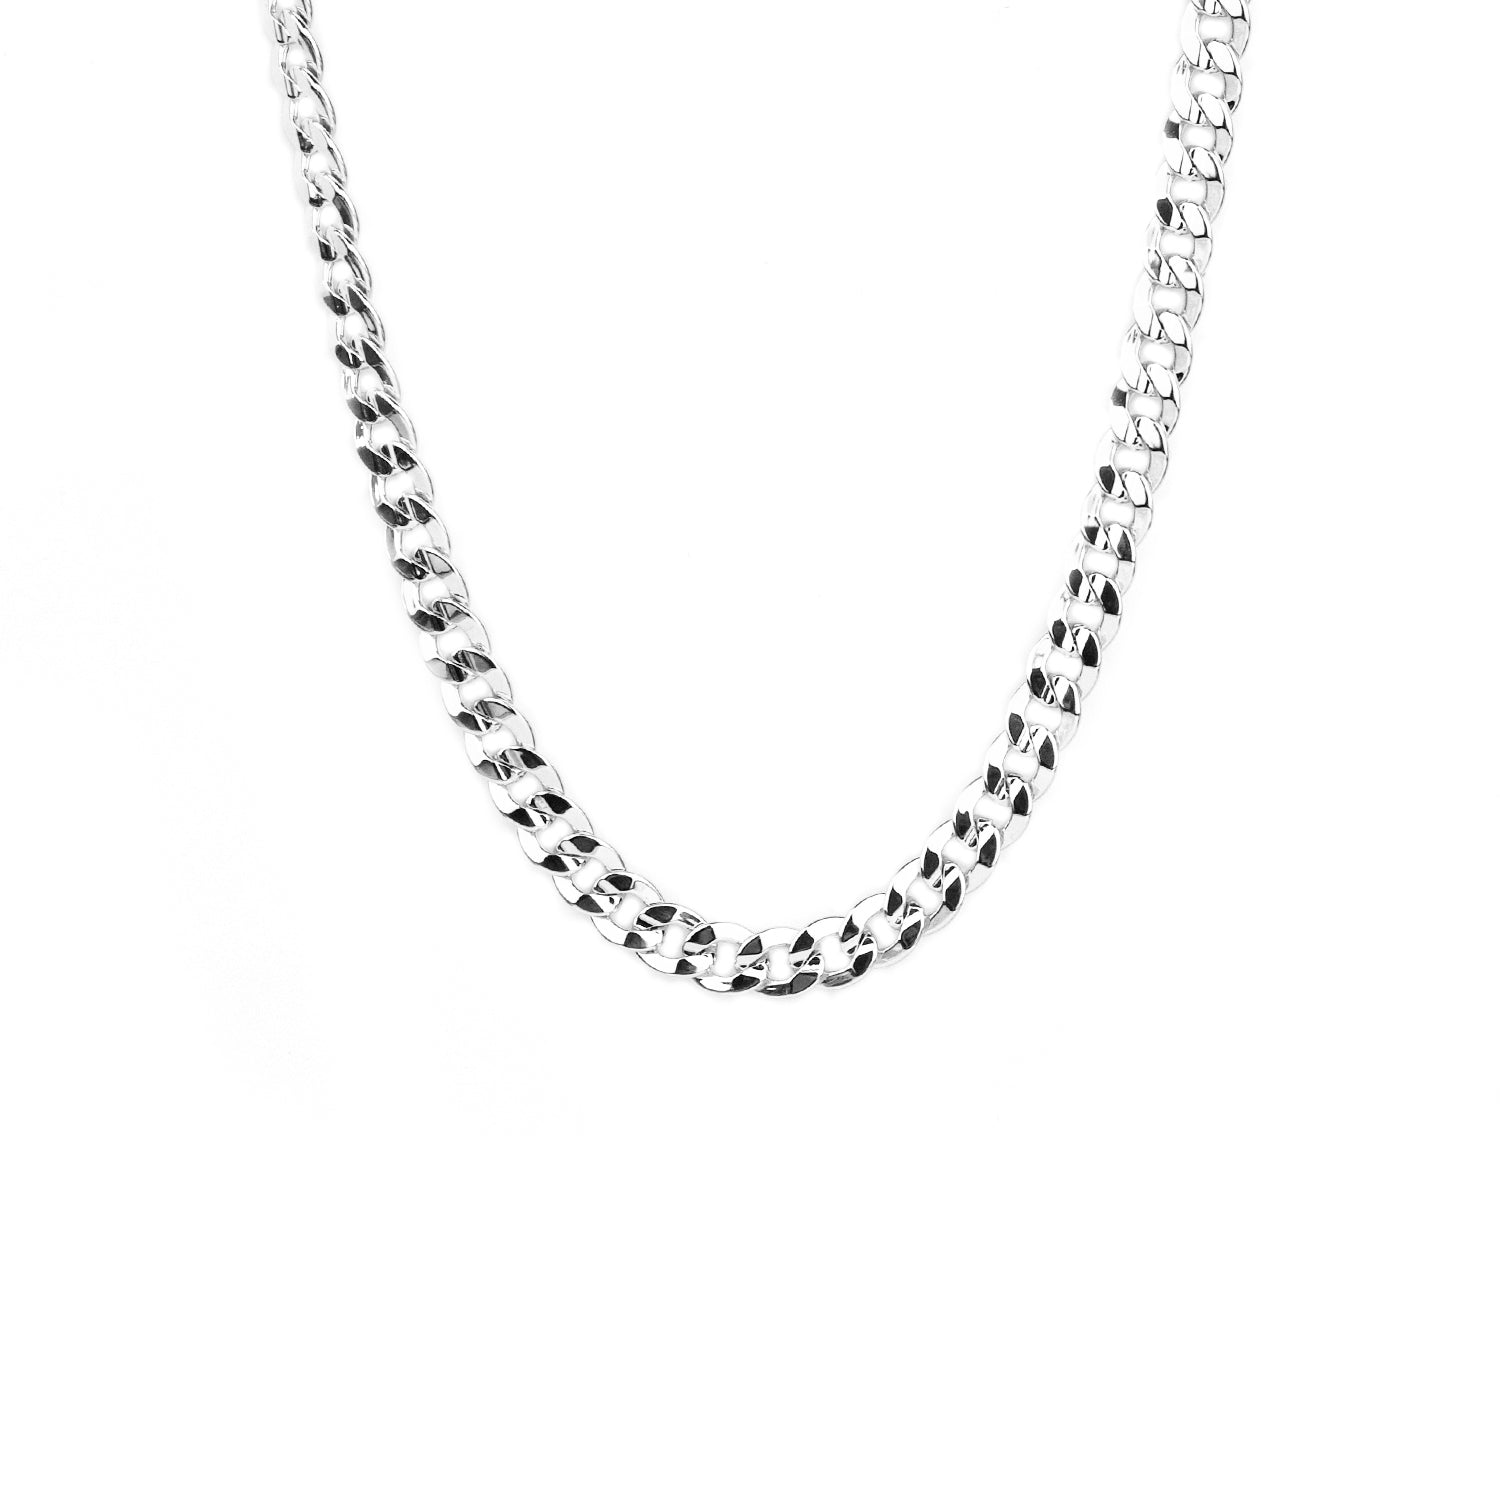 chain link heart clasp necklace – Marlyn Schiff, LLC